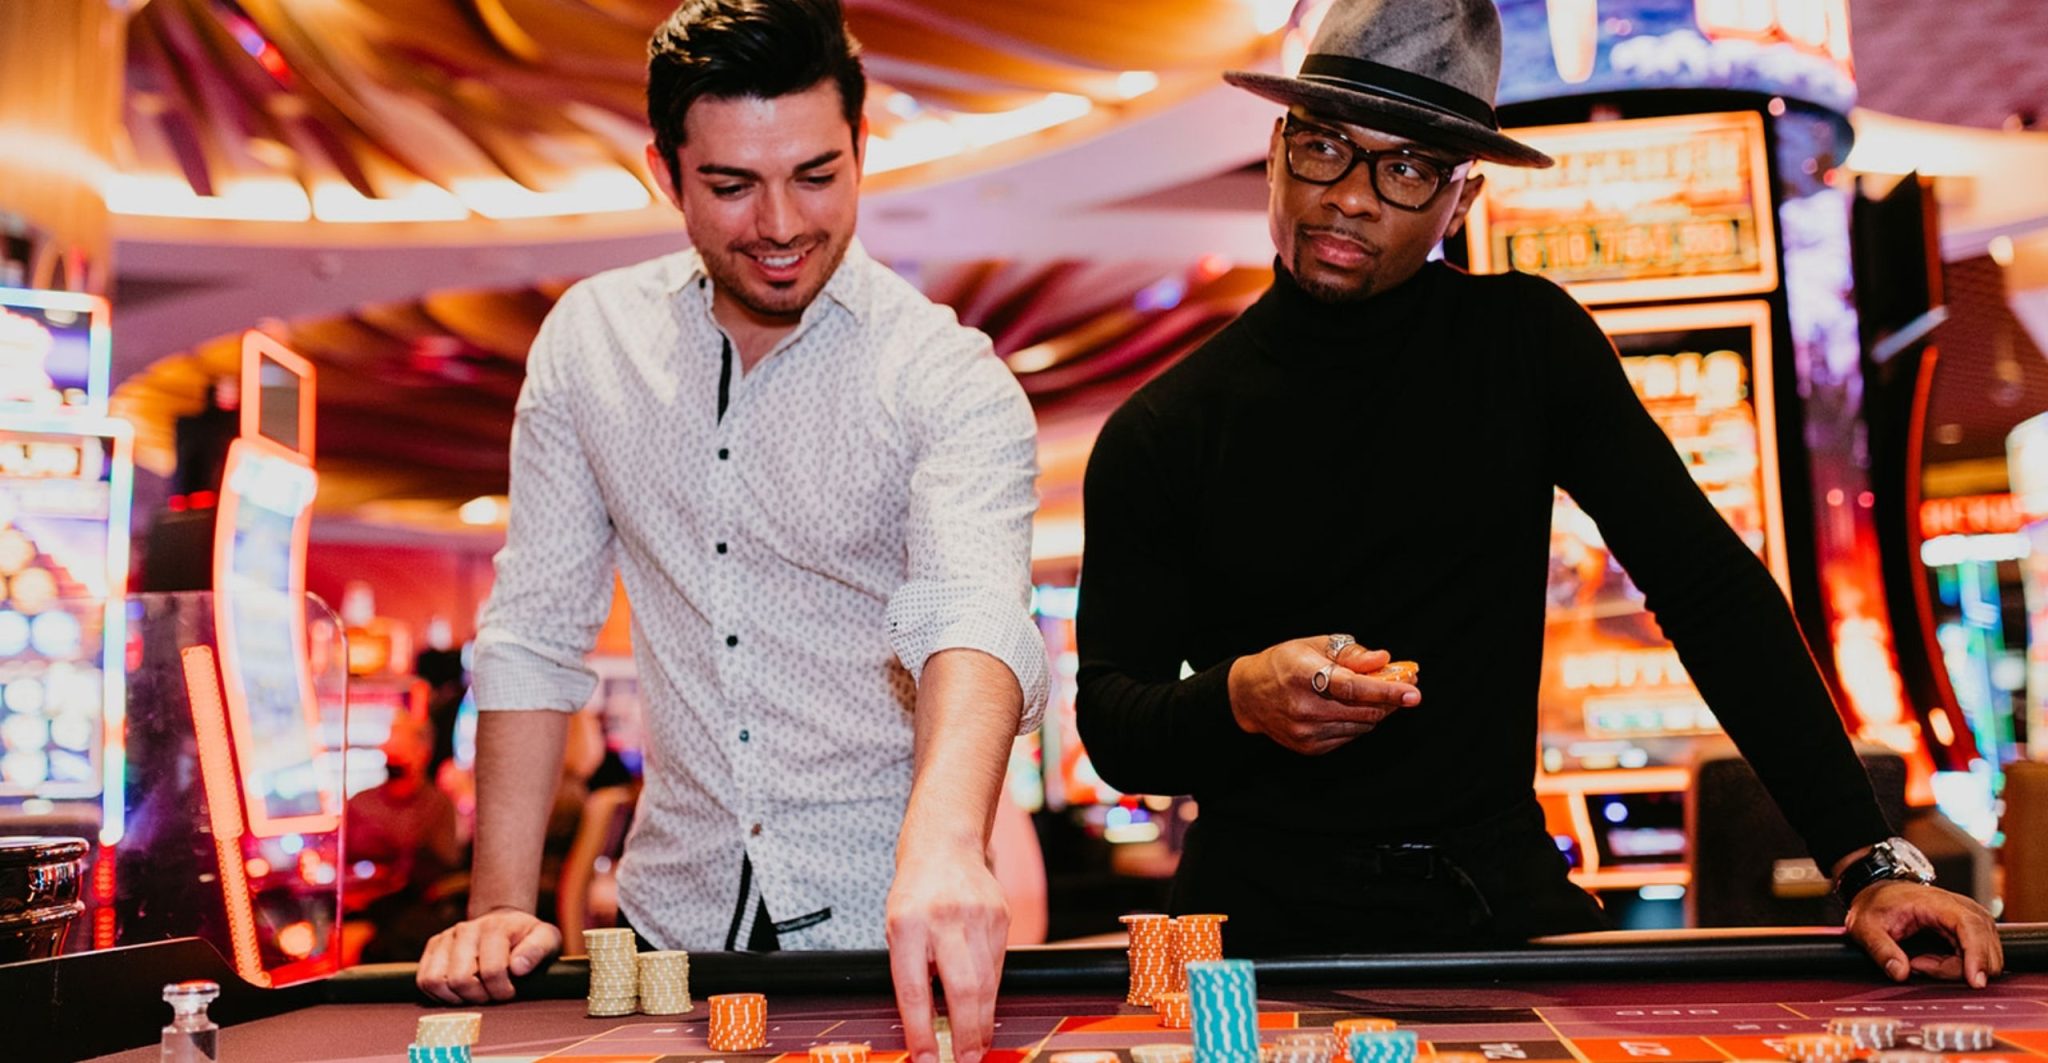 Two men playing table games in the casino.